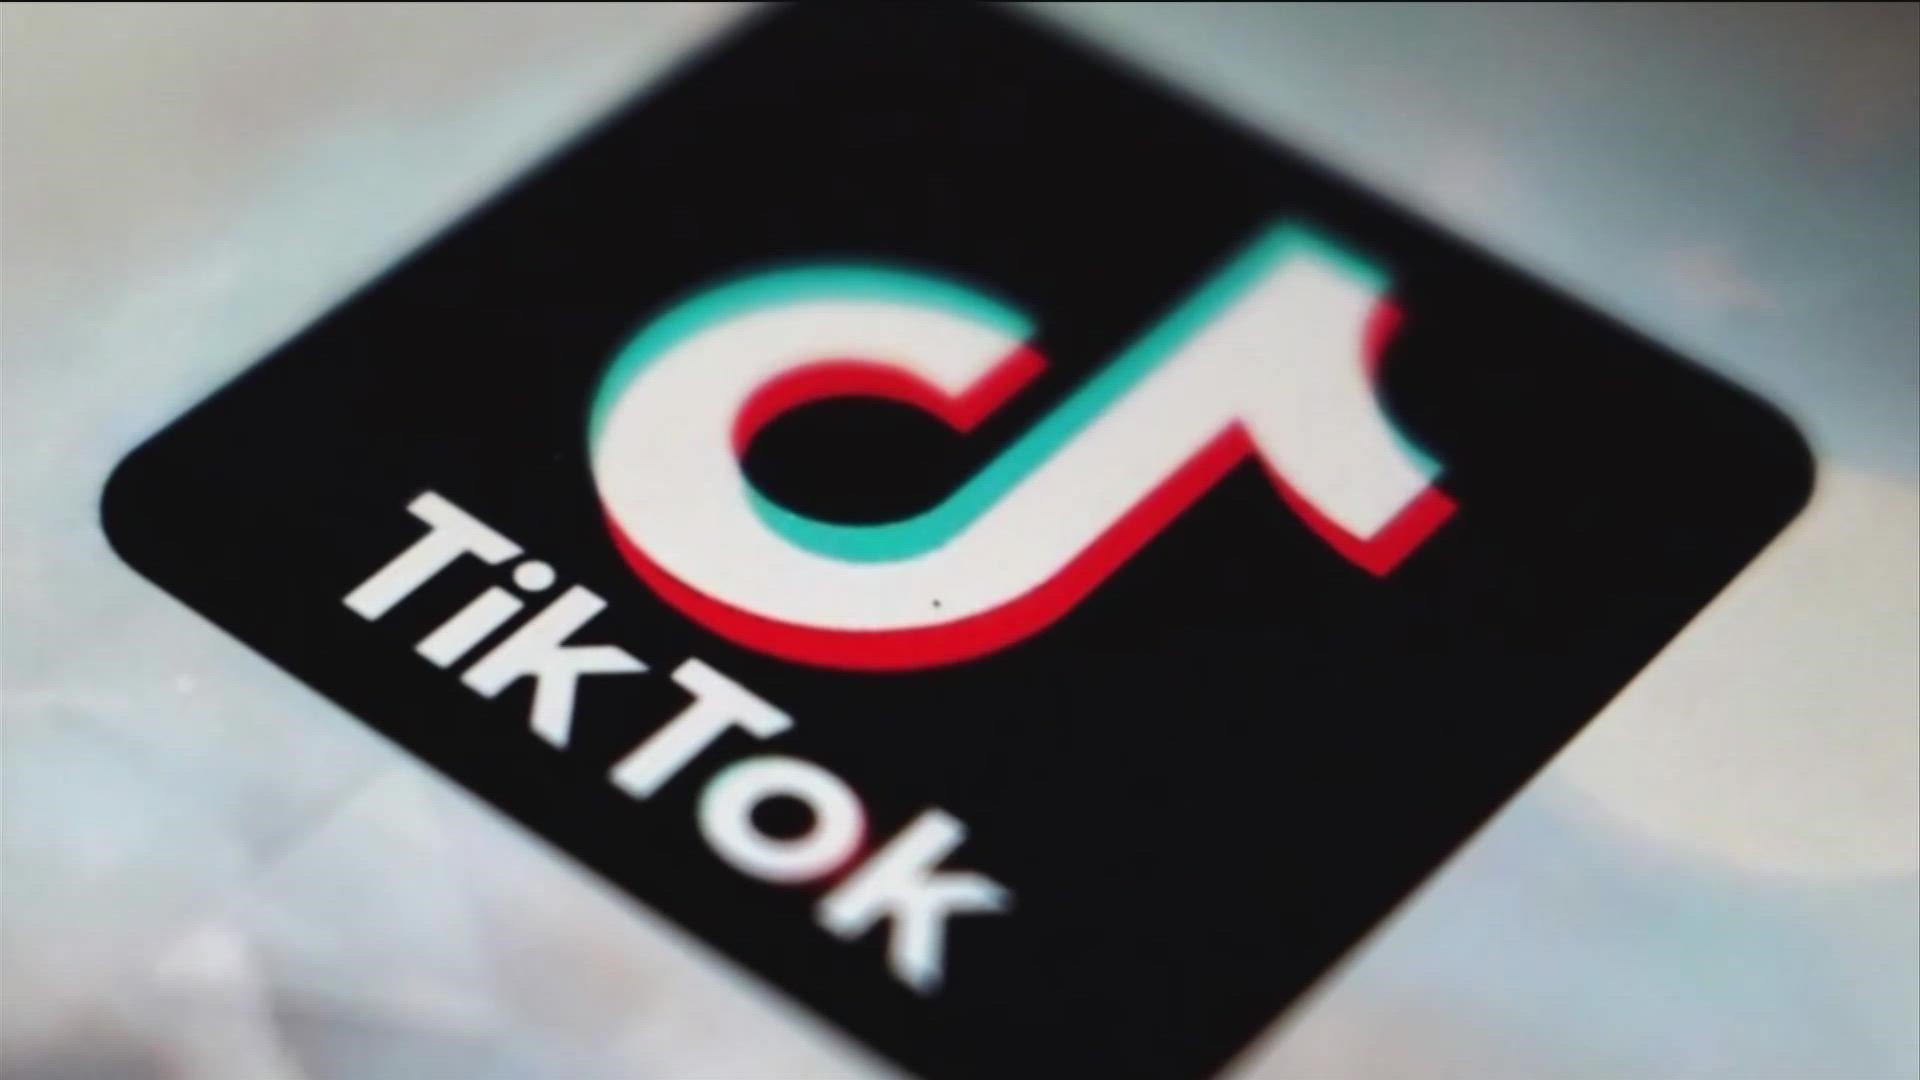 A viral TikTok claims UT professors can be fired, demoted or even sent to jail if they use the word "racism" in class. That isn't true.